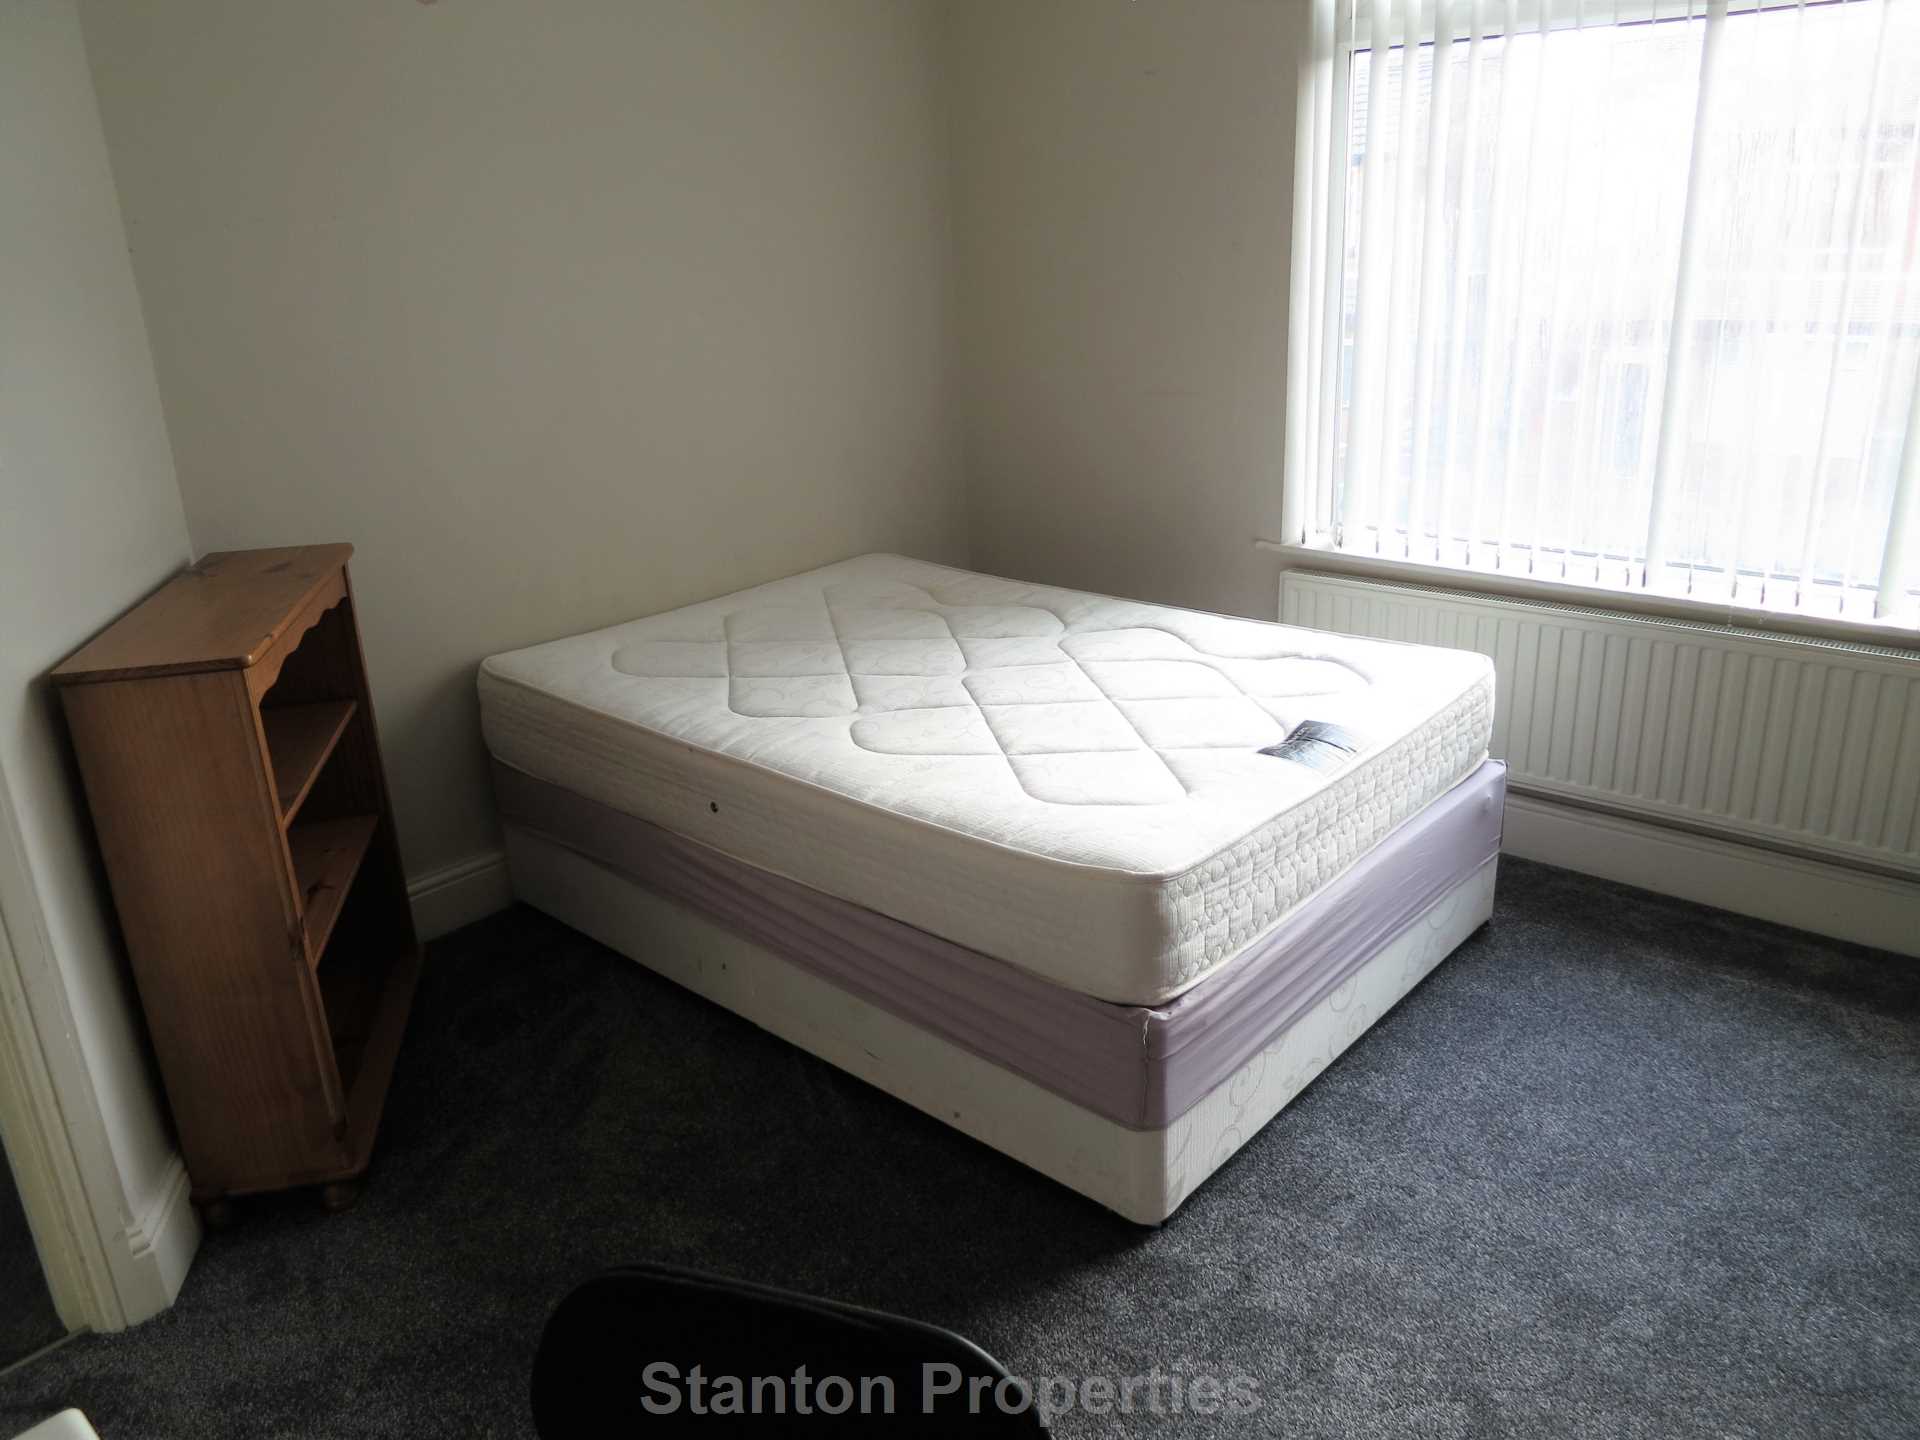 See Video Tour, £135 pppw, Brocklebank Road, Fallowfield, Image 13